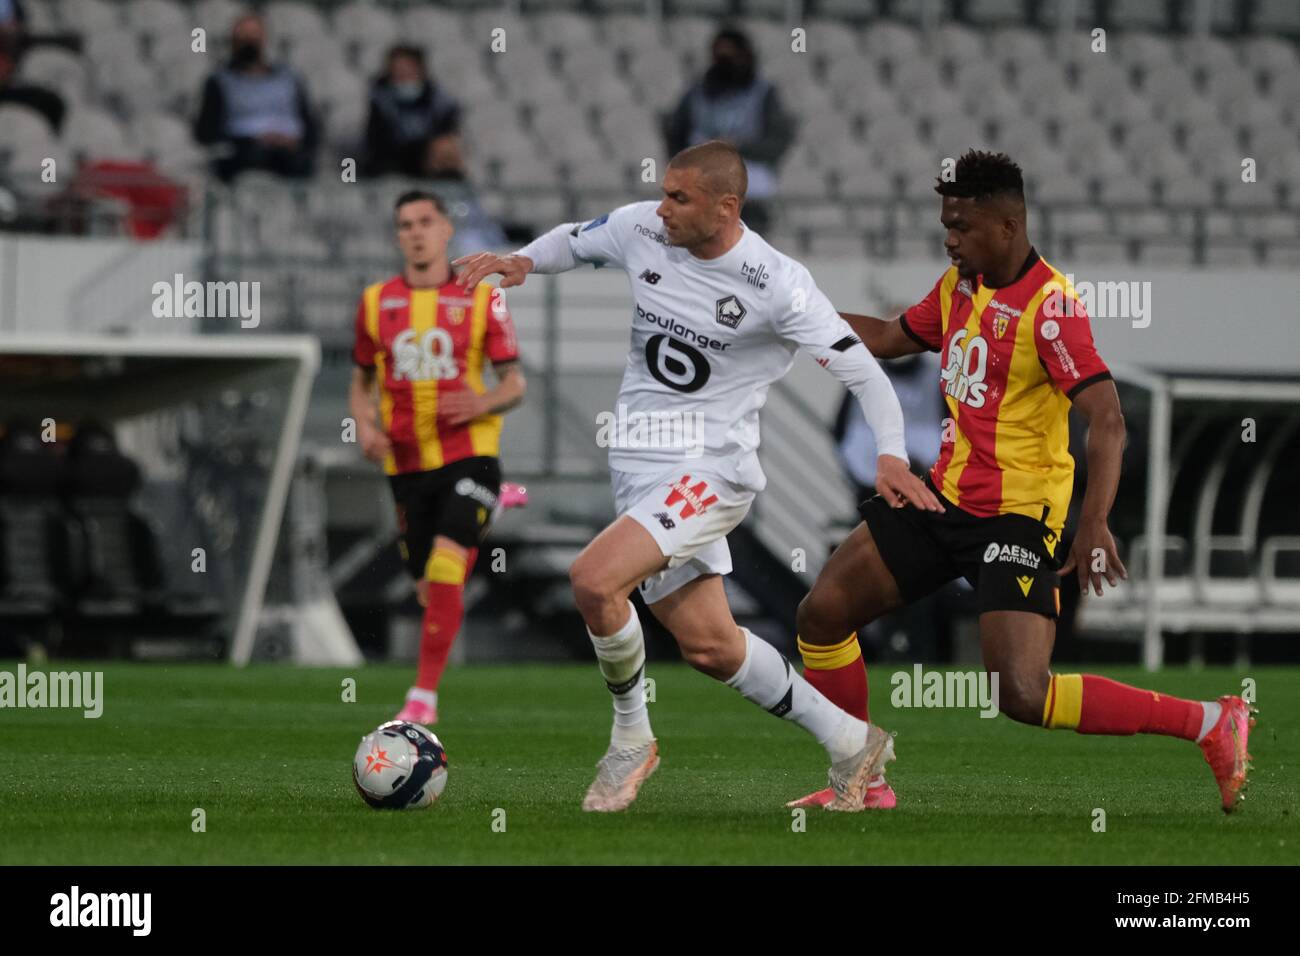 Lens, Hauts de France, France. 8th May, 2021. Forward of Lille BURAK YILMAZ  in action during the French championship soccer Ligue 1 Uber Eats Lille  against RC Lens at Felix Bollaert Delelis